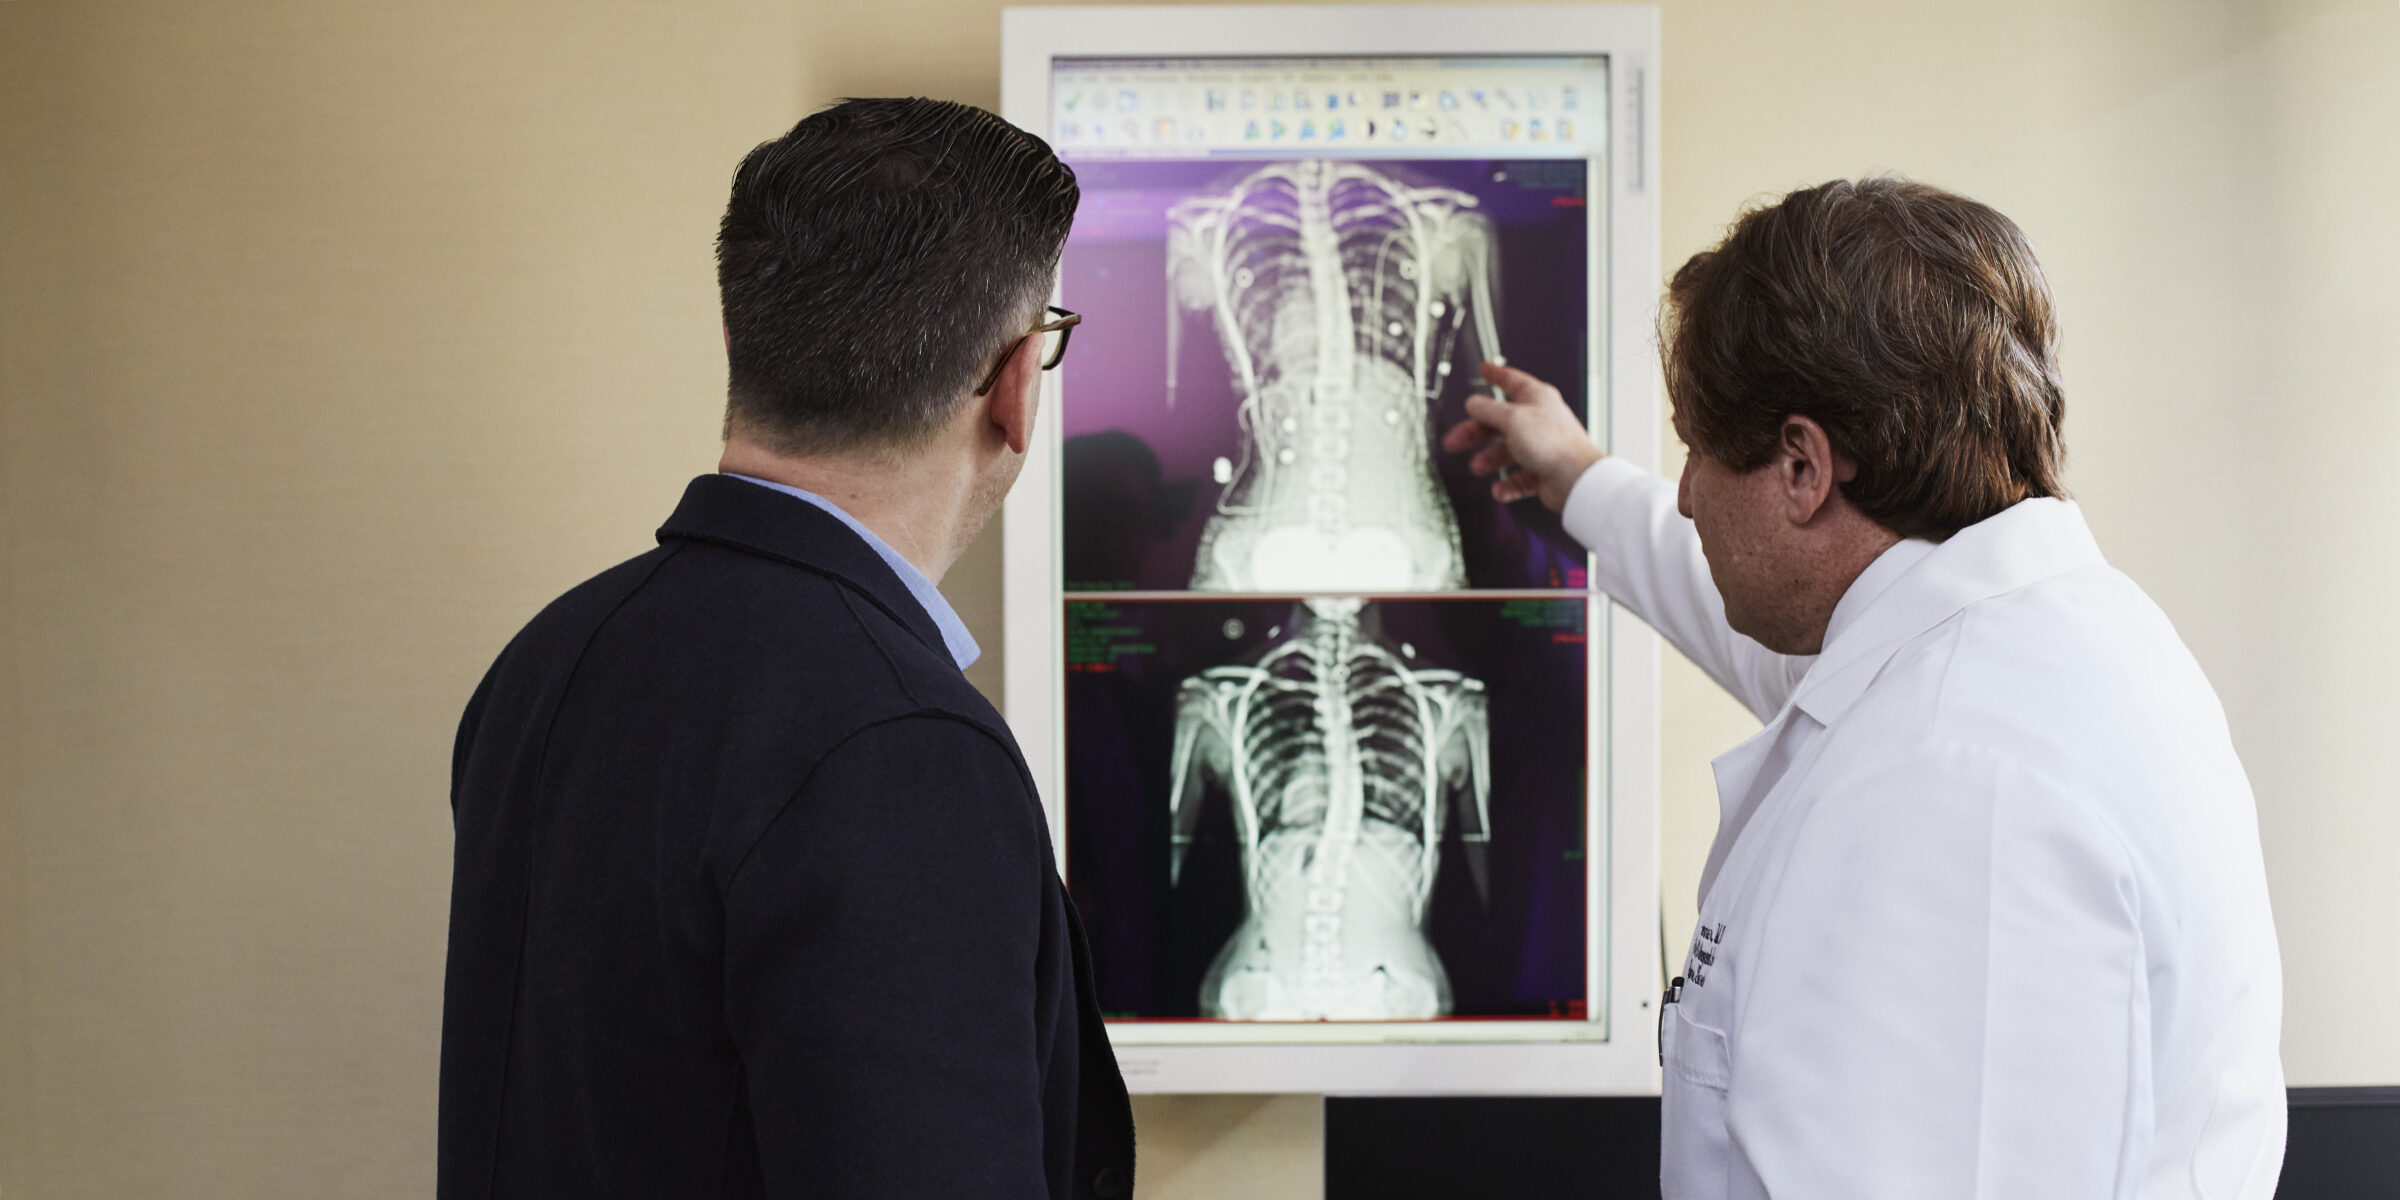 Discussing X-rays to maintain patient relationships